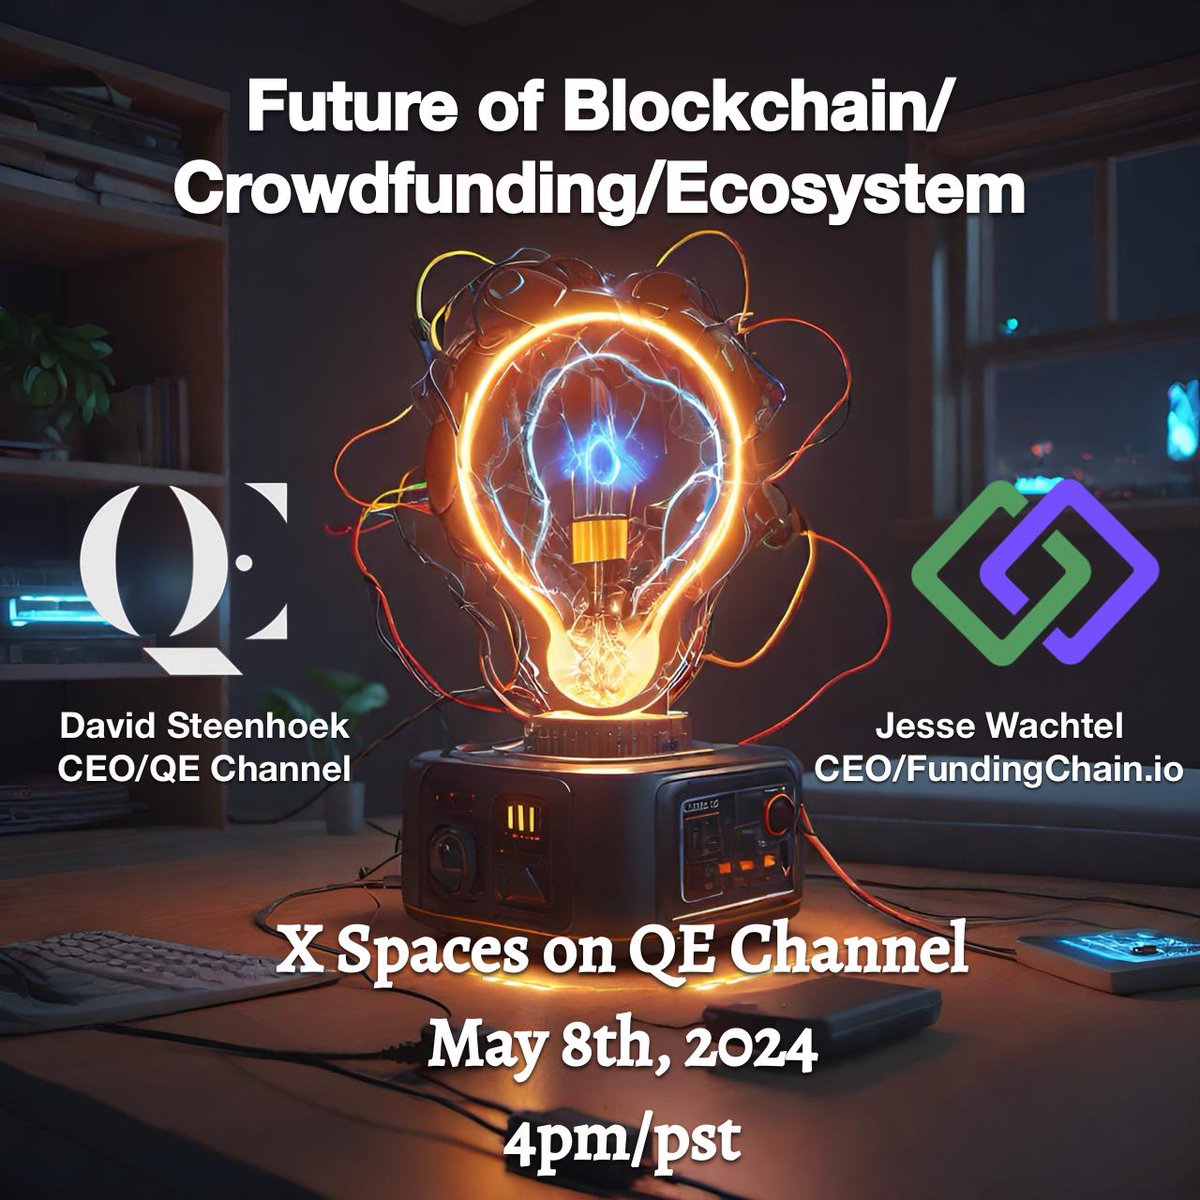 5% of the world uses Blockchain digital assets. We have only just begun. Future is now!

#blockchain #create #build #tech #questioneverything 

@QeChannel @qecoin @MediatorFilms @rullyjkusuma @BrendaaGilbert @VcVoid @MeatTracker @FundingChain @Rocketverse369 @Earth2Mars369…